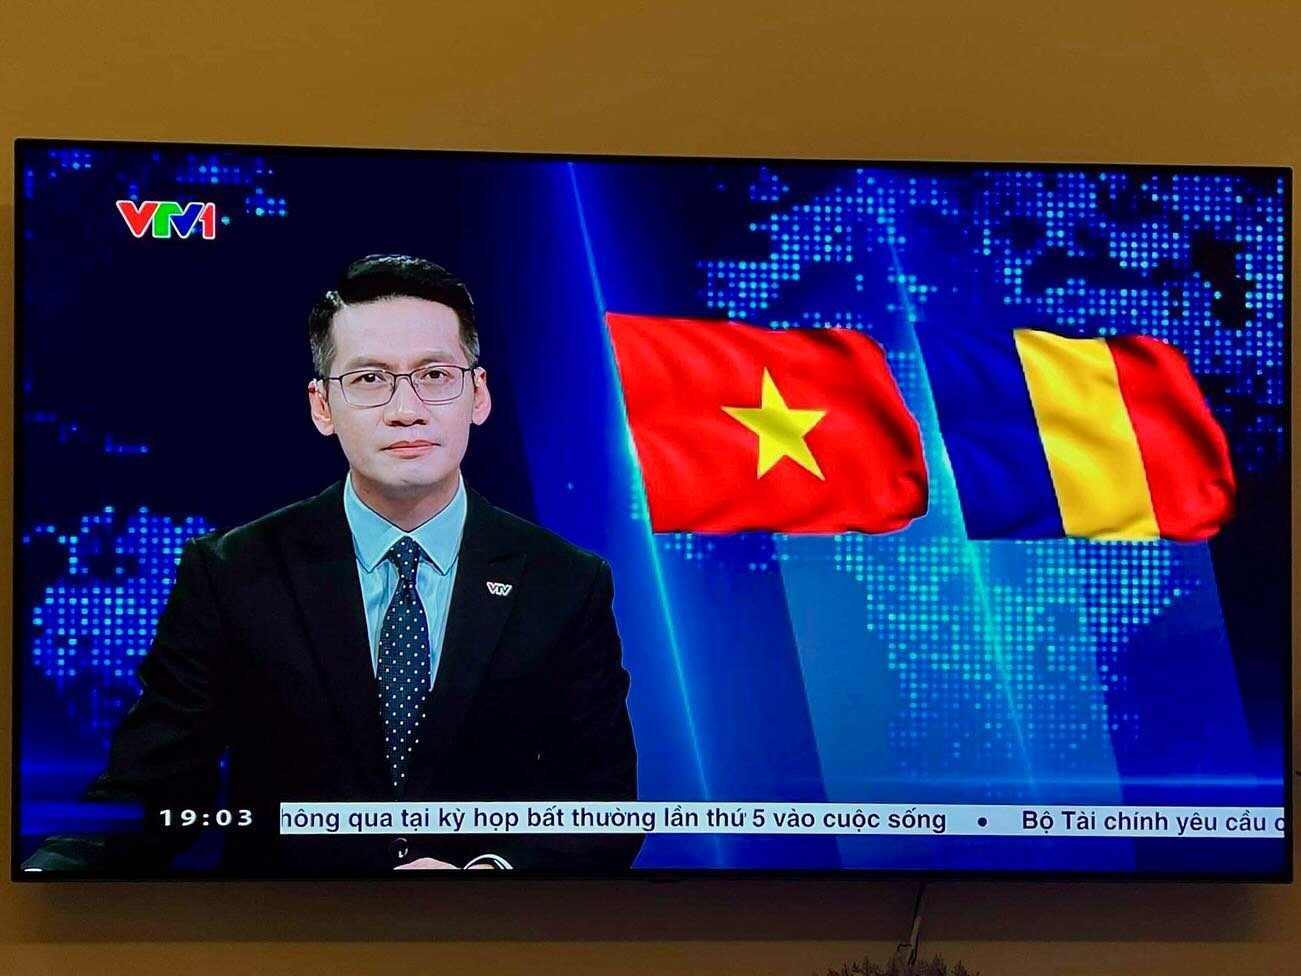 Today we had the great pleasure to have the Vietnamese President invited to our country 🇻🇳🇷🇴
.
We are very proud of the collaboration between our two countries
.
#drk #vietnam #romania #asia #europe